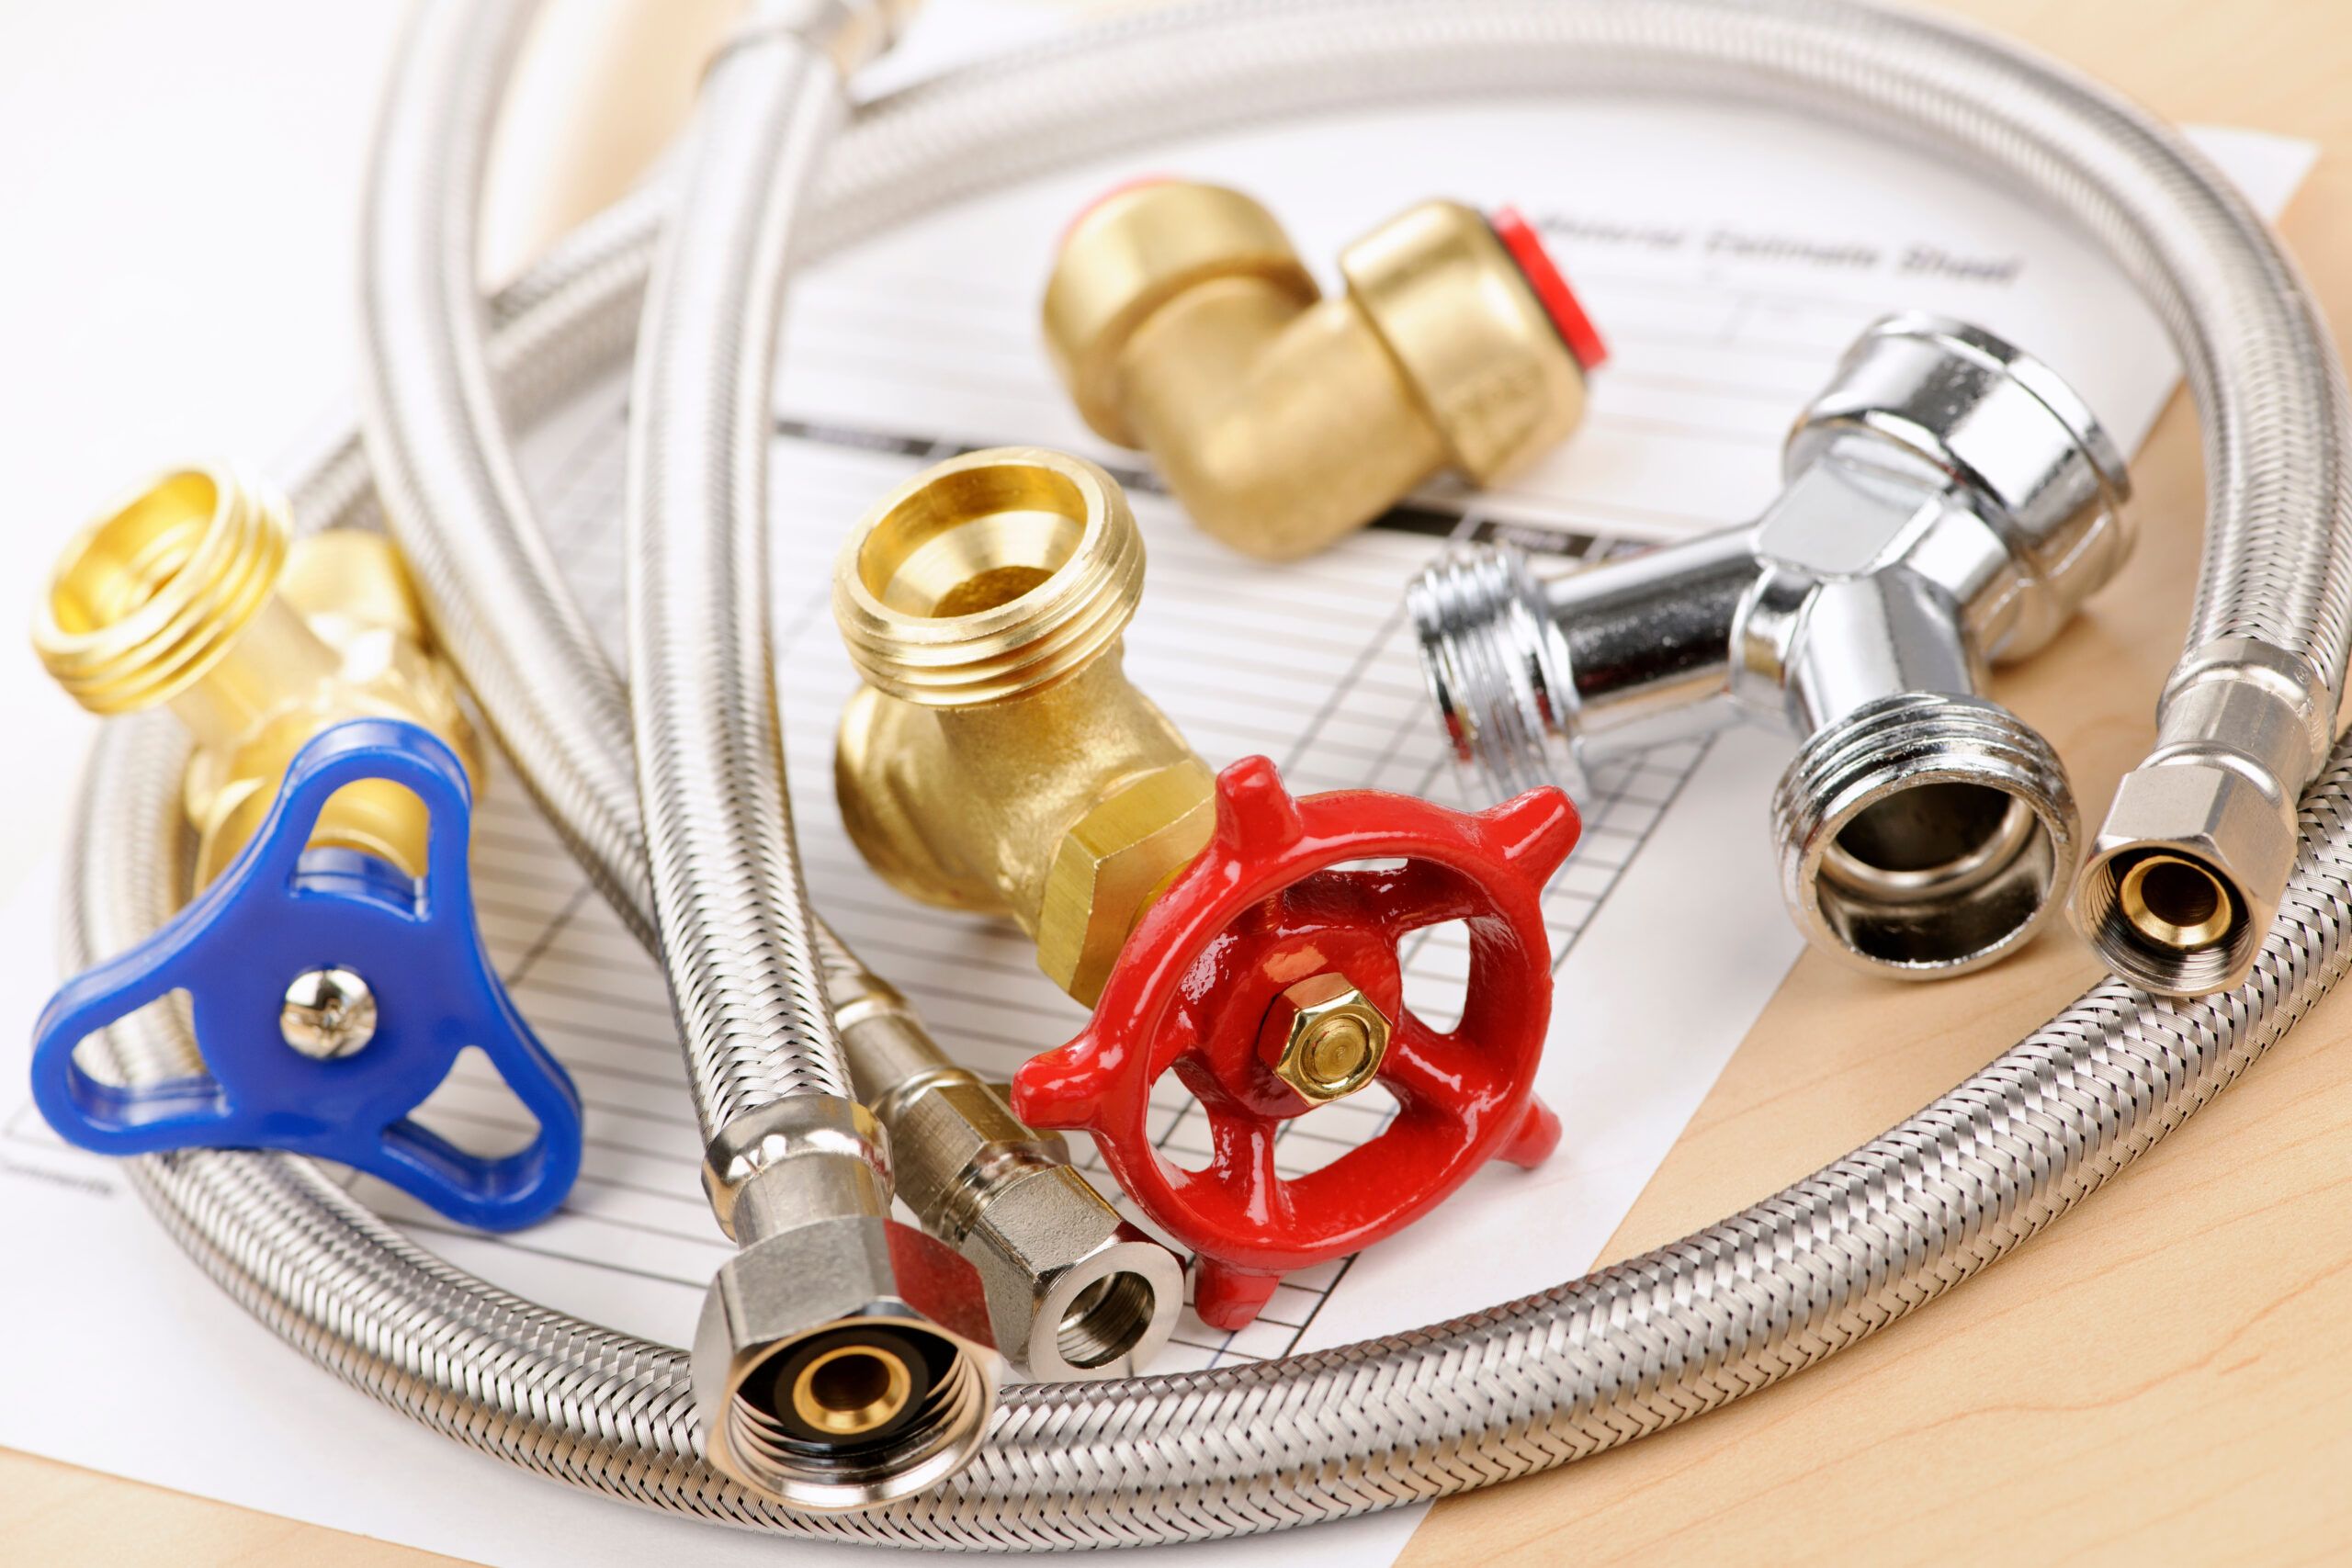 Plumbing valves hoses and assorted parts with estimate sheet